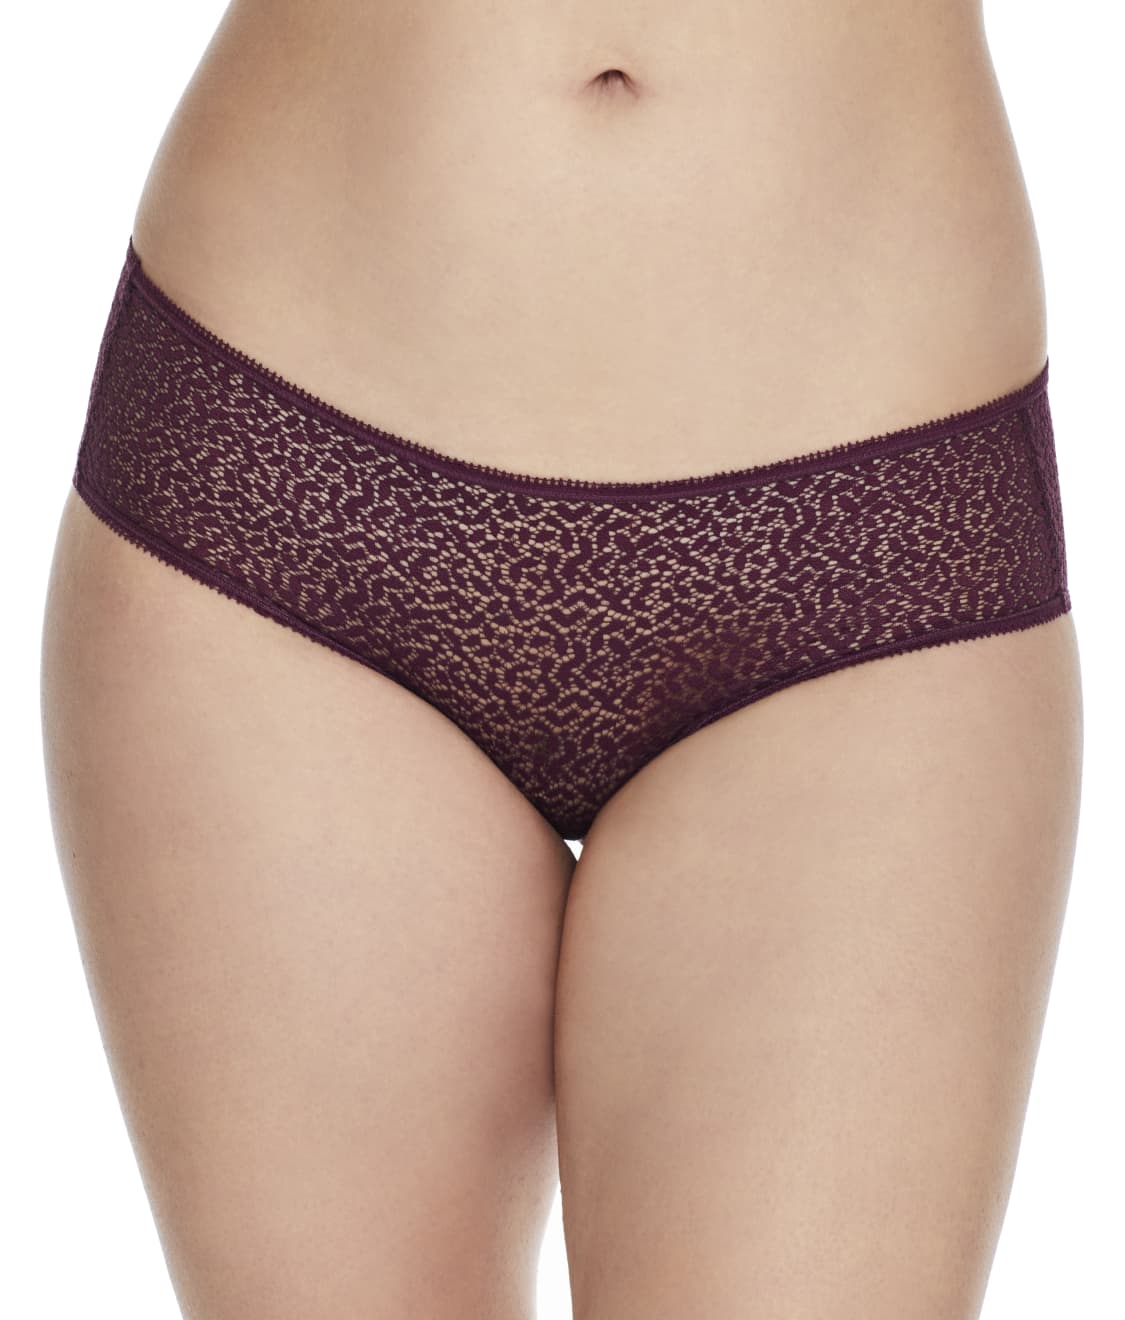 M XL  MSRP $13.00 NWT L Details about   DKNY Sheer Lace Hipster Panty DK5022   S